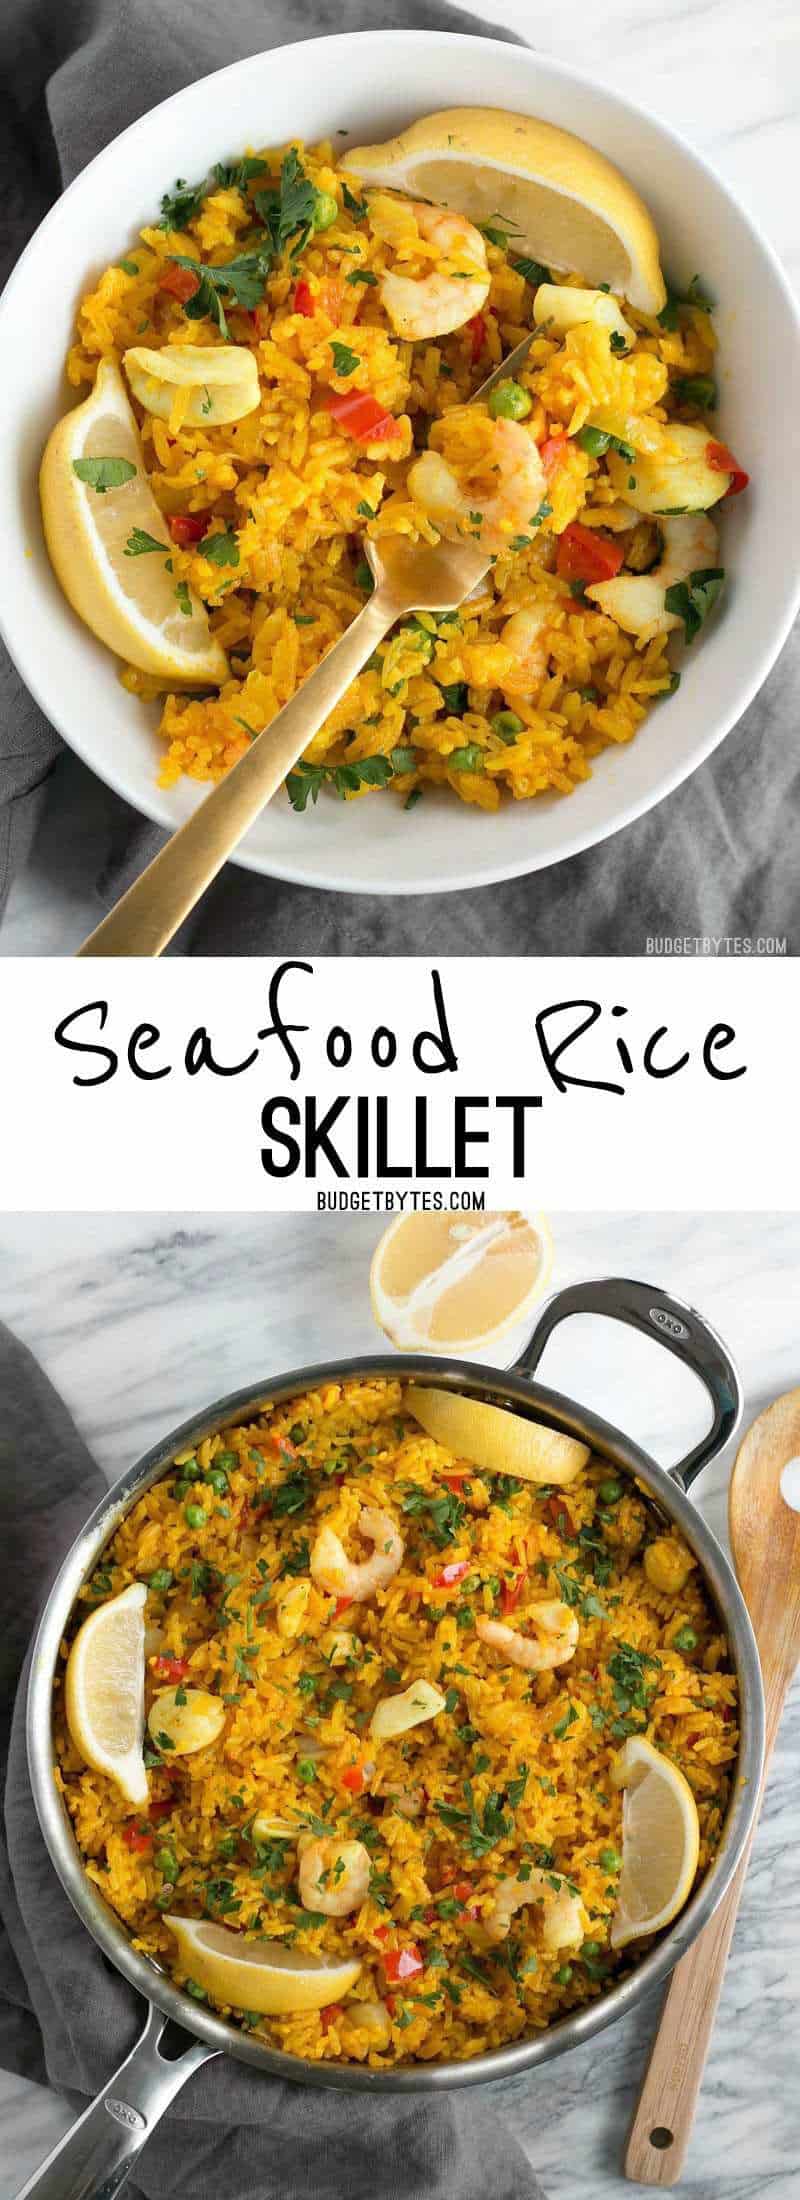 Seafood Rice Skillet is a nod to seafood paella using easy to find ingredients and equipment. Impress your dinner guests with this easy and impressive dish! BudgetBytes.com